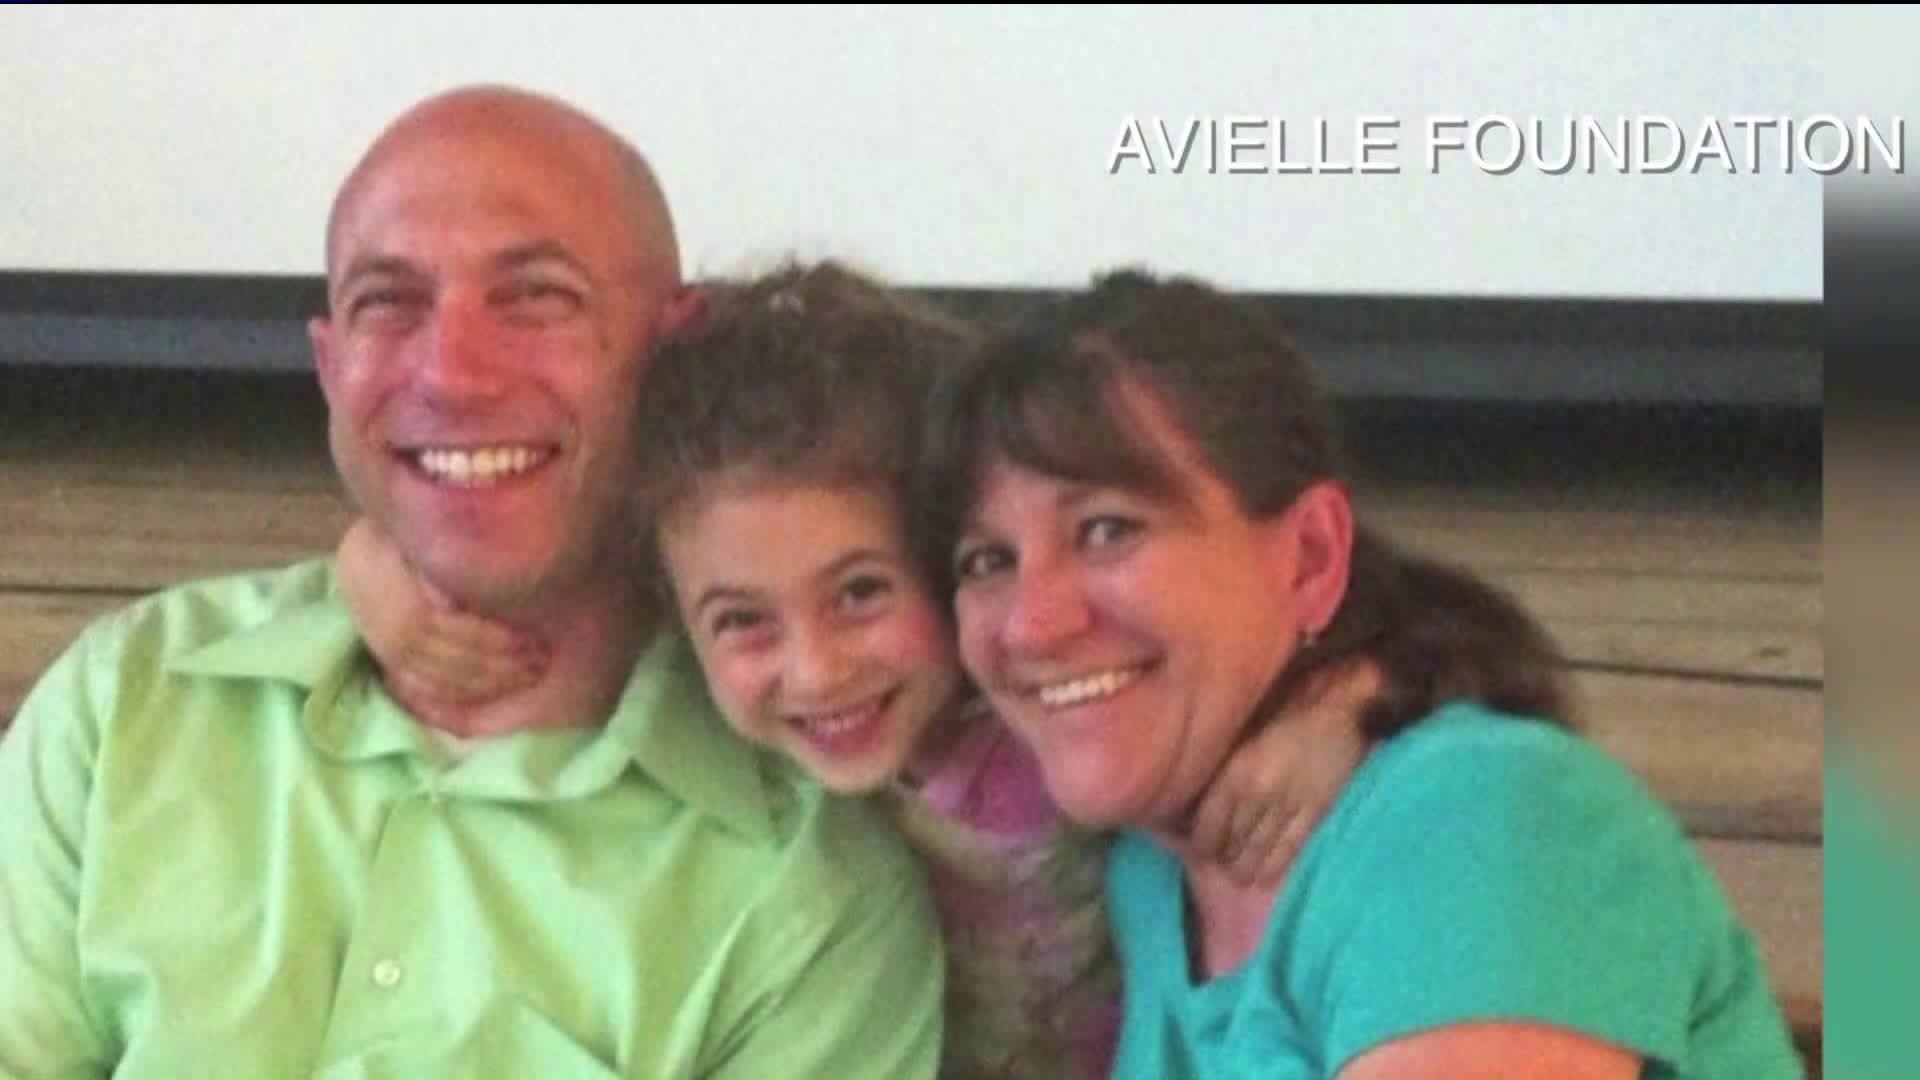 Father of child killed in Sandy Hook massacre found dead; GoFundMe page created to fund child`s foundation